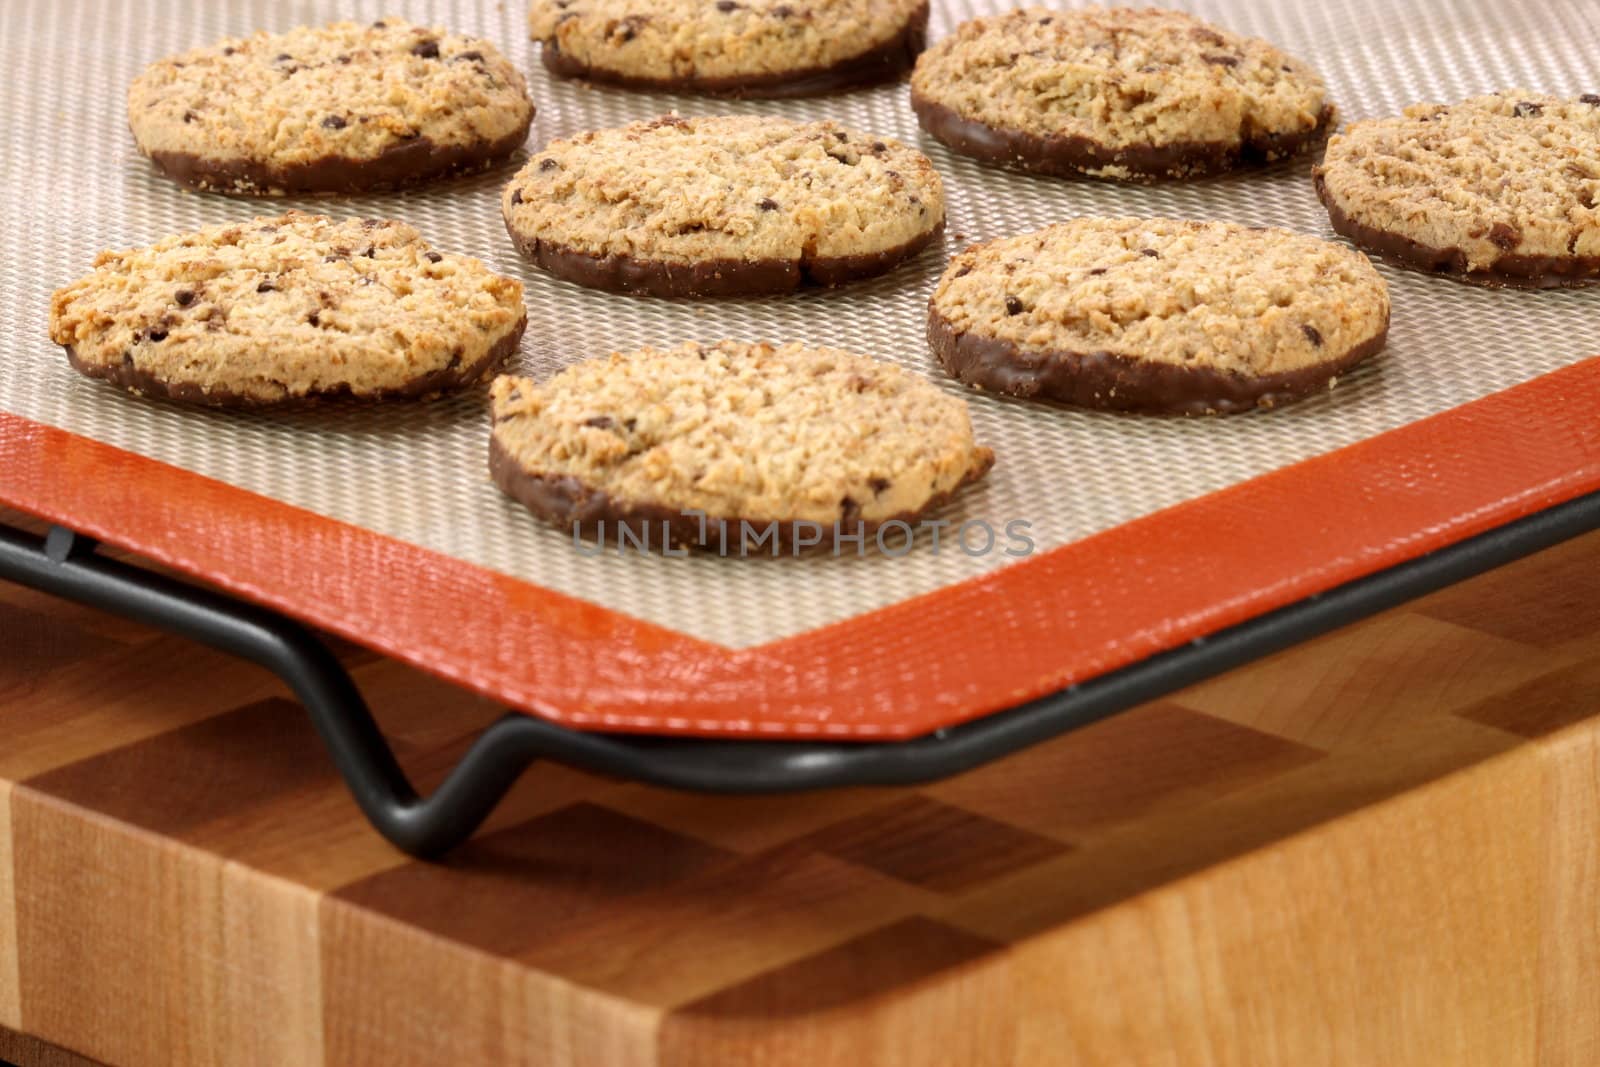 Fresh baked Stack of warm chocolate base and chips cookies on baking silicone sheet